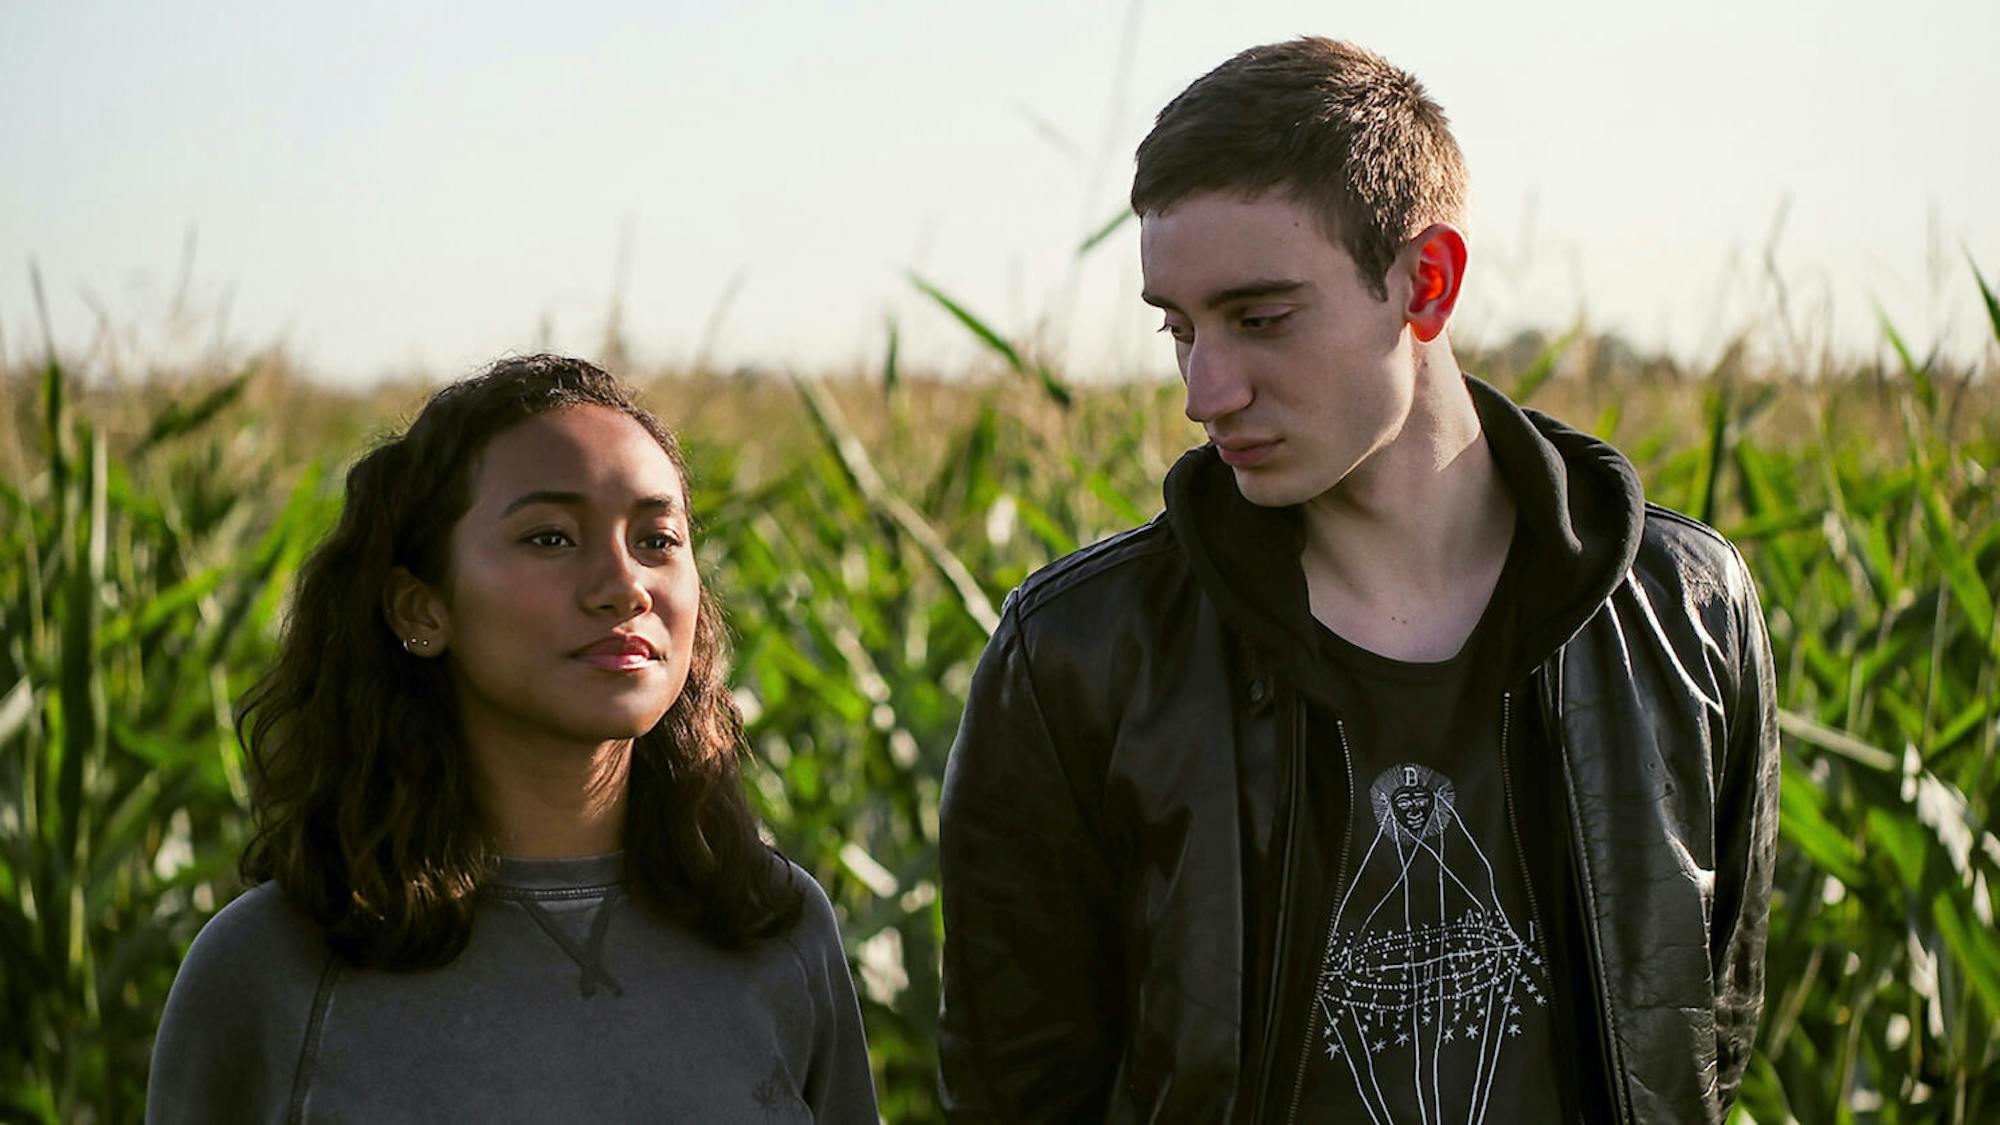 Makani Young (Sydney Park) and Ollie Larsson (Théodore Pellerin) stand in a corn field wearing dark clothing. Ollie looks to his right at Makani, while she looks off into the distance.